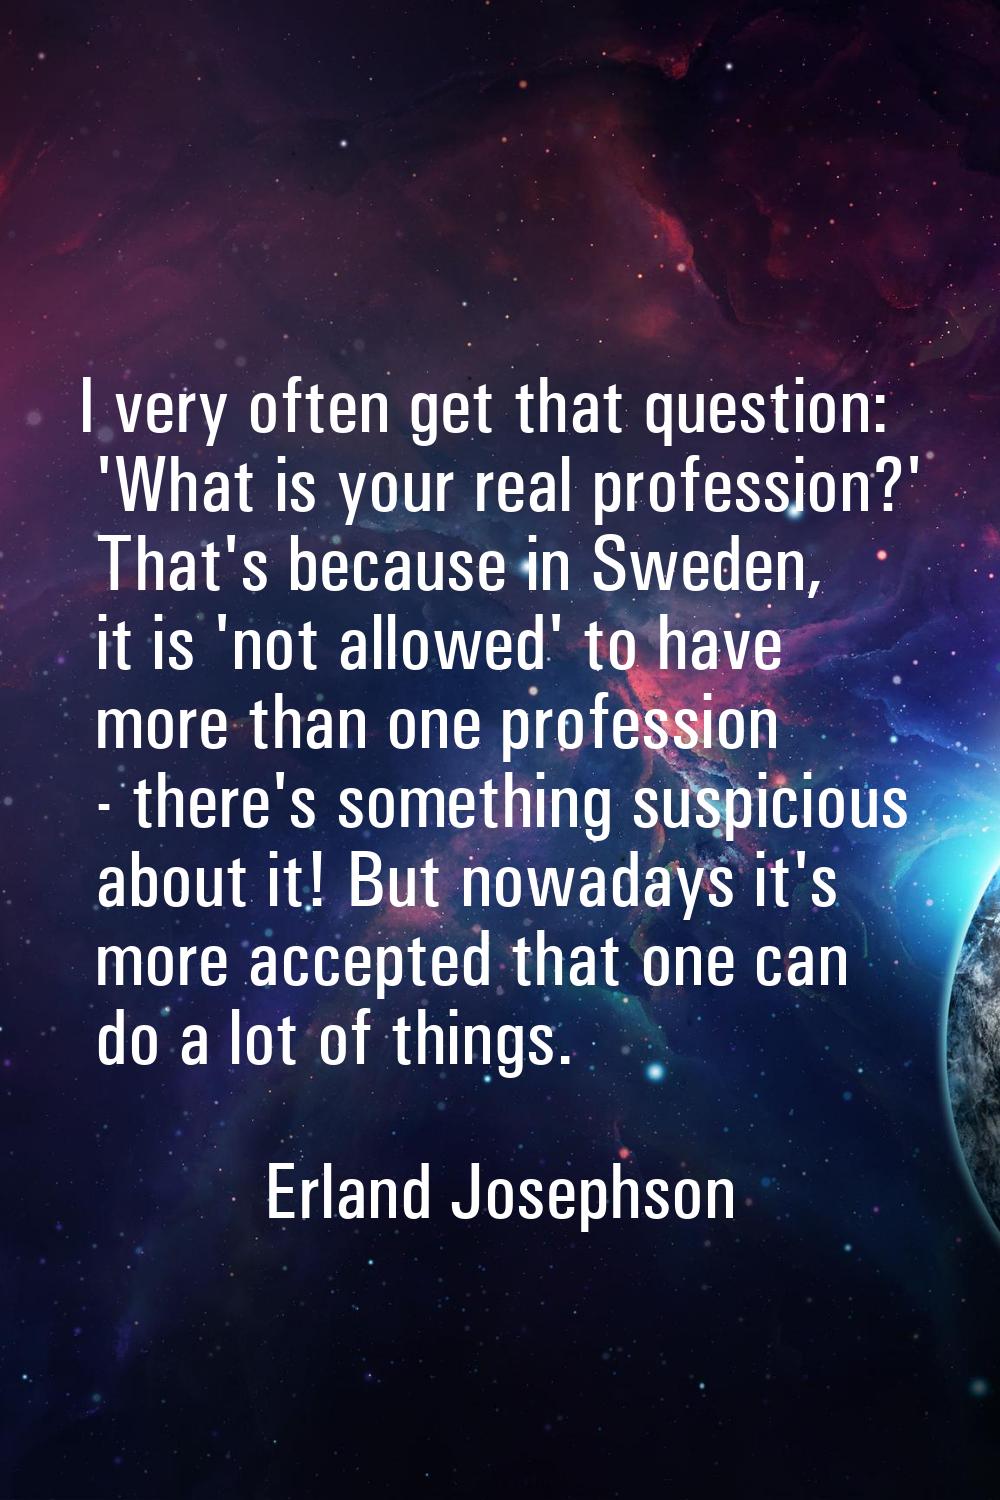 I very often get that question: 'What is your real profession?' That's because in Sweden, it is 'no